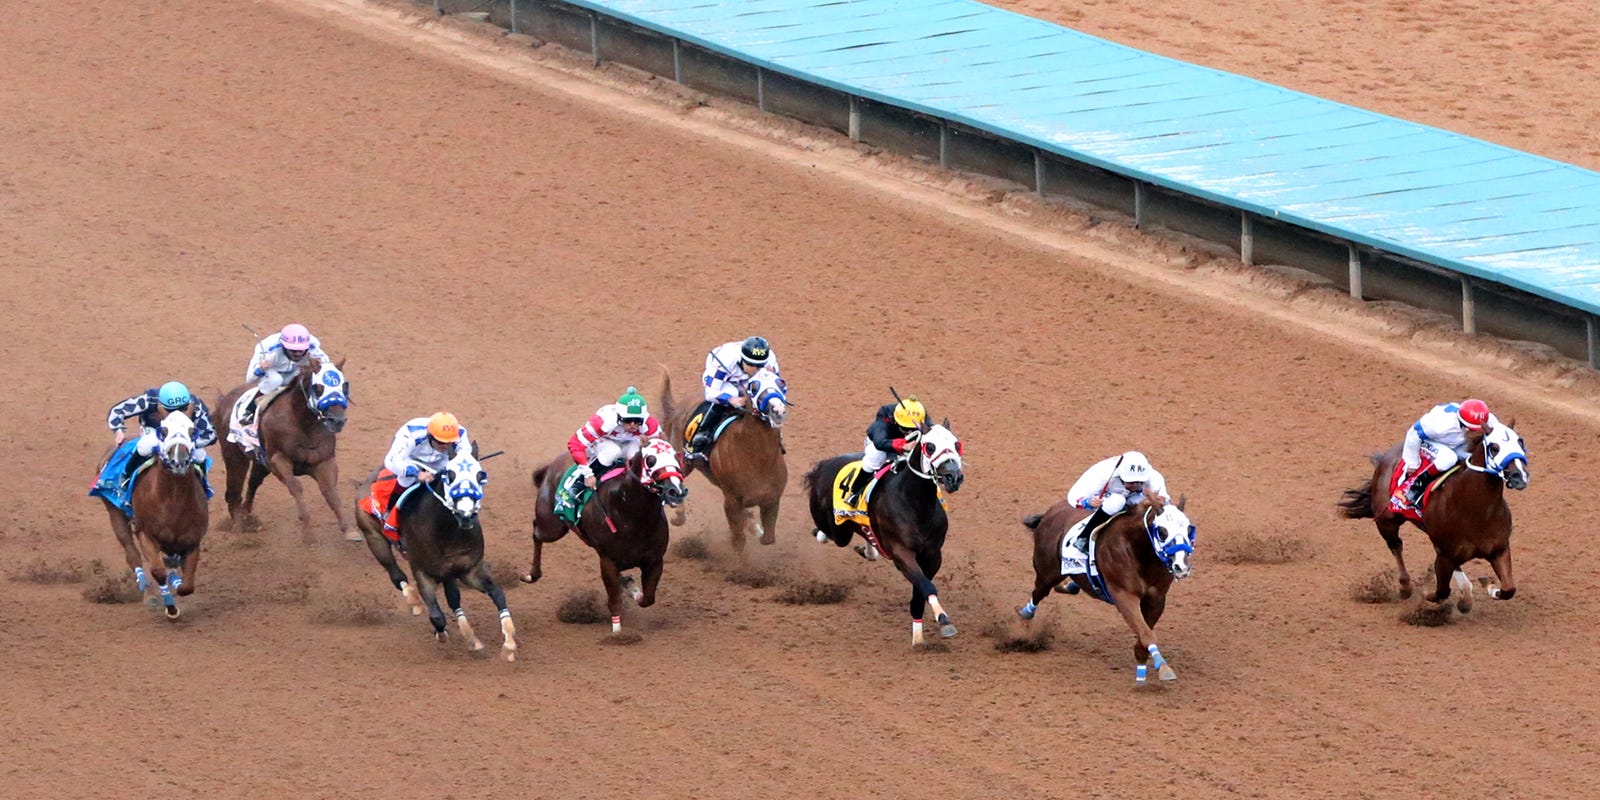 Safety a priority as New Mexico horse racing resumes at Ruidoso Downs